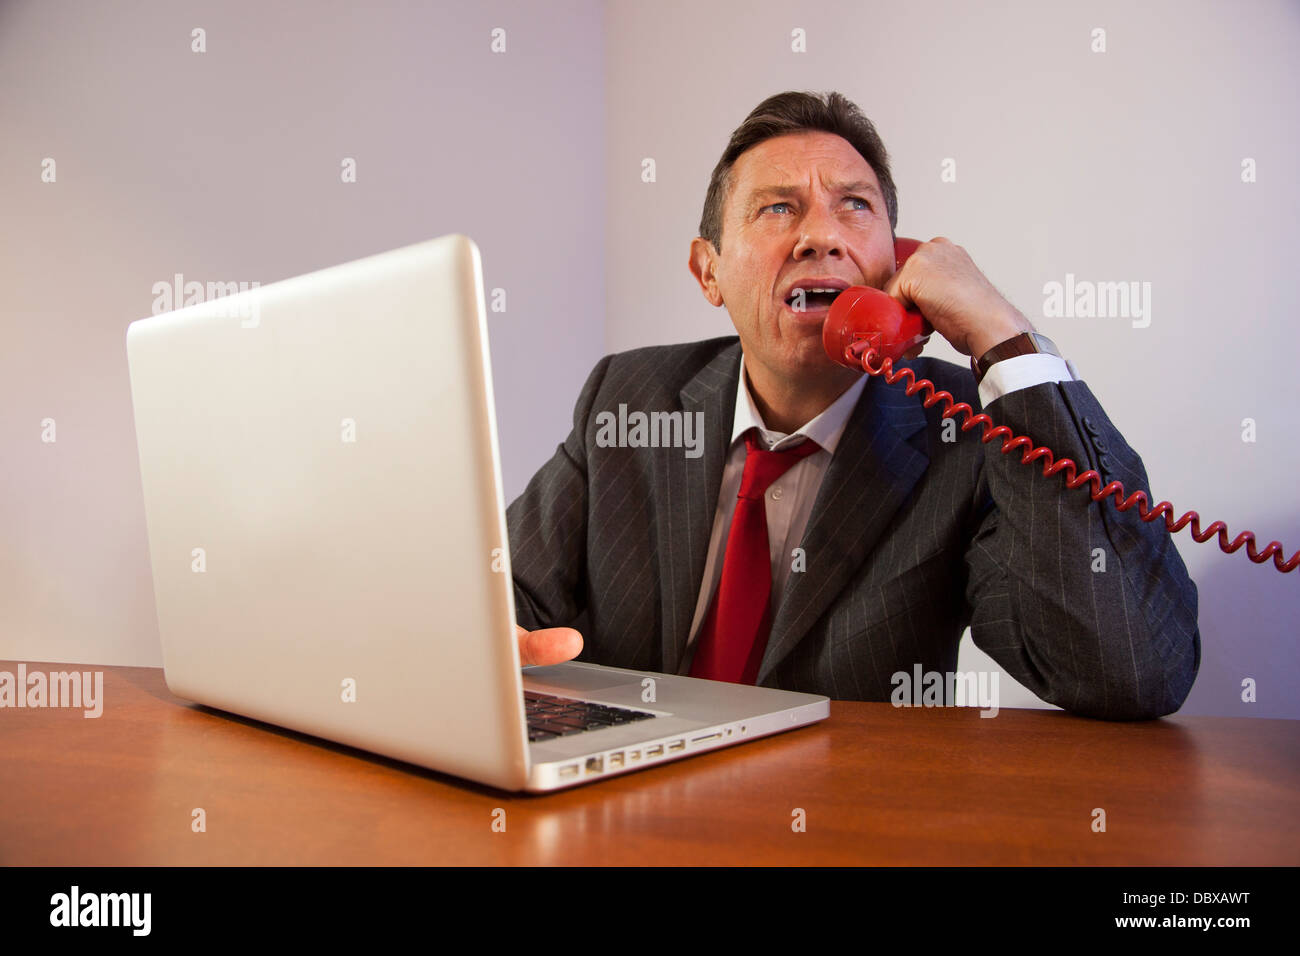 Angry man wearing a suit, shouting down a red telephone while sitting in front of a laptop on a desk. Stock Photo